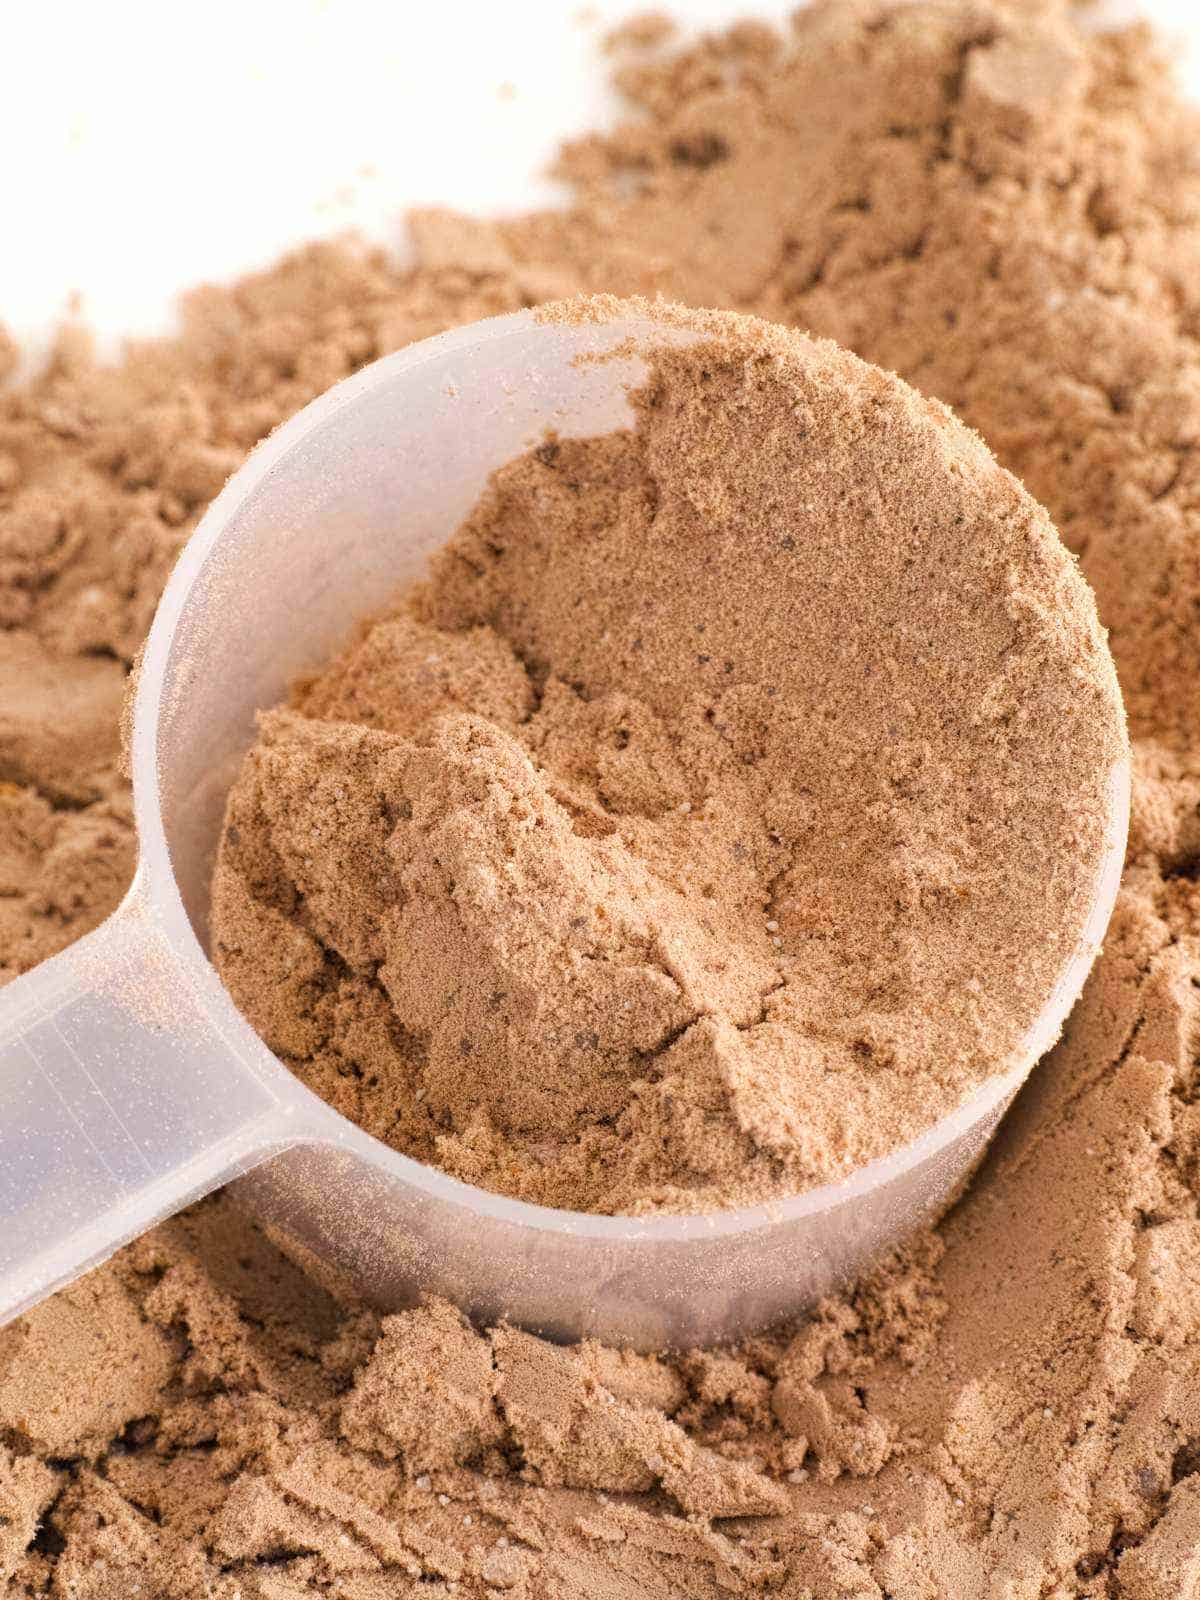 Scoop of soy protein powder.